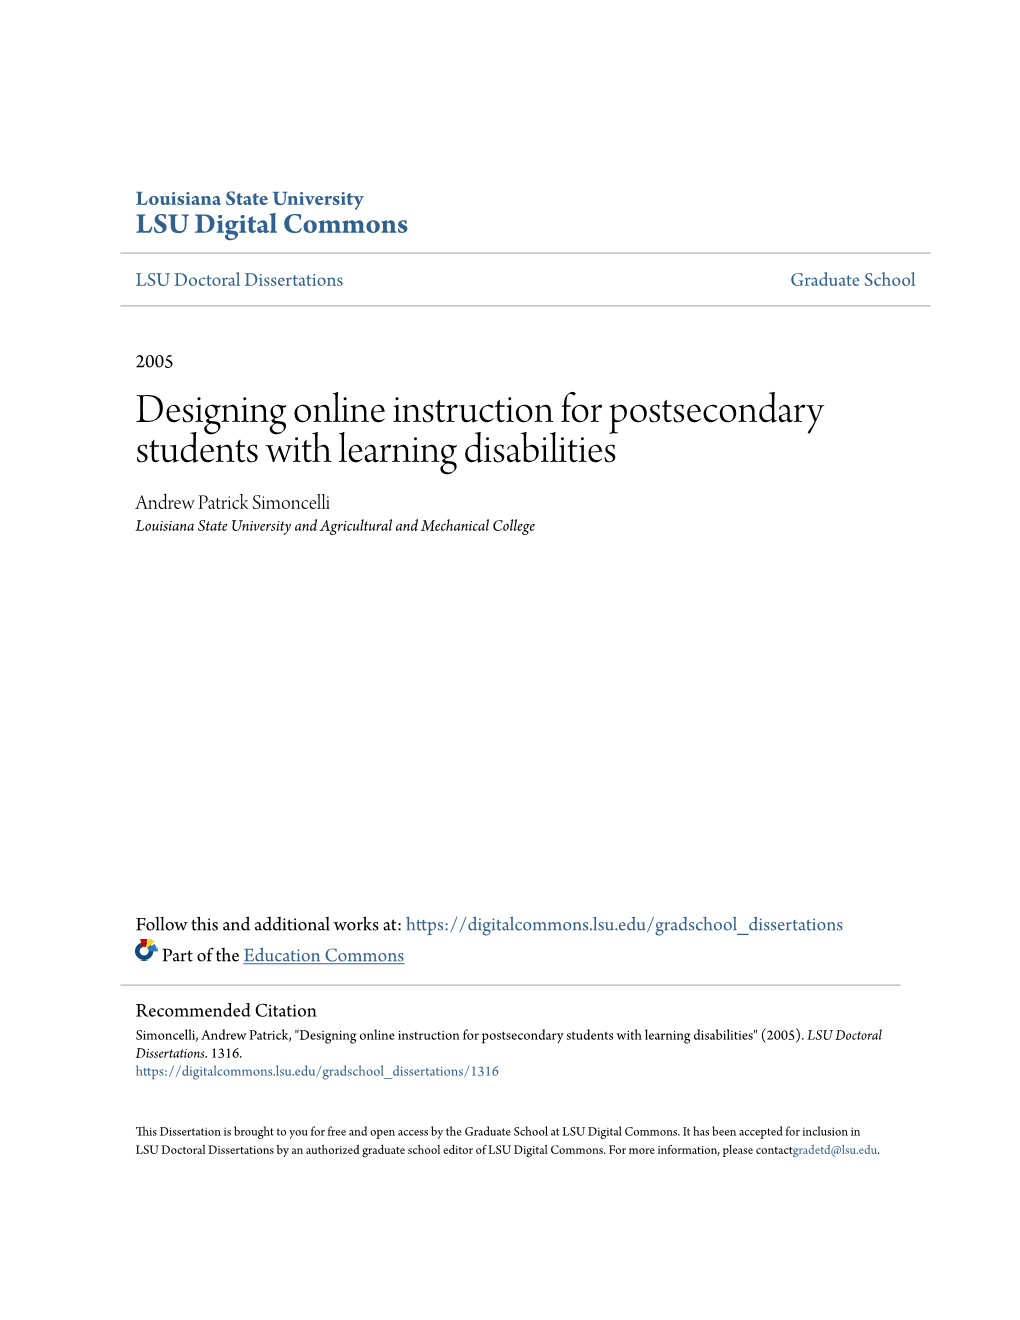 Designing Online Instruction for Postsecondary Students With